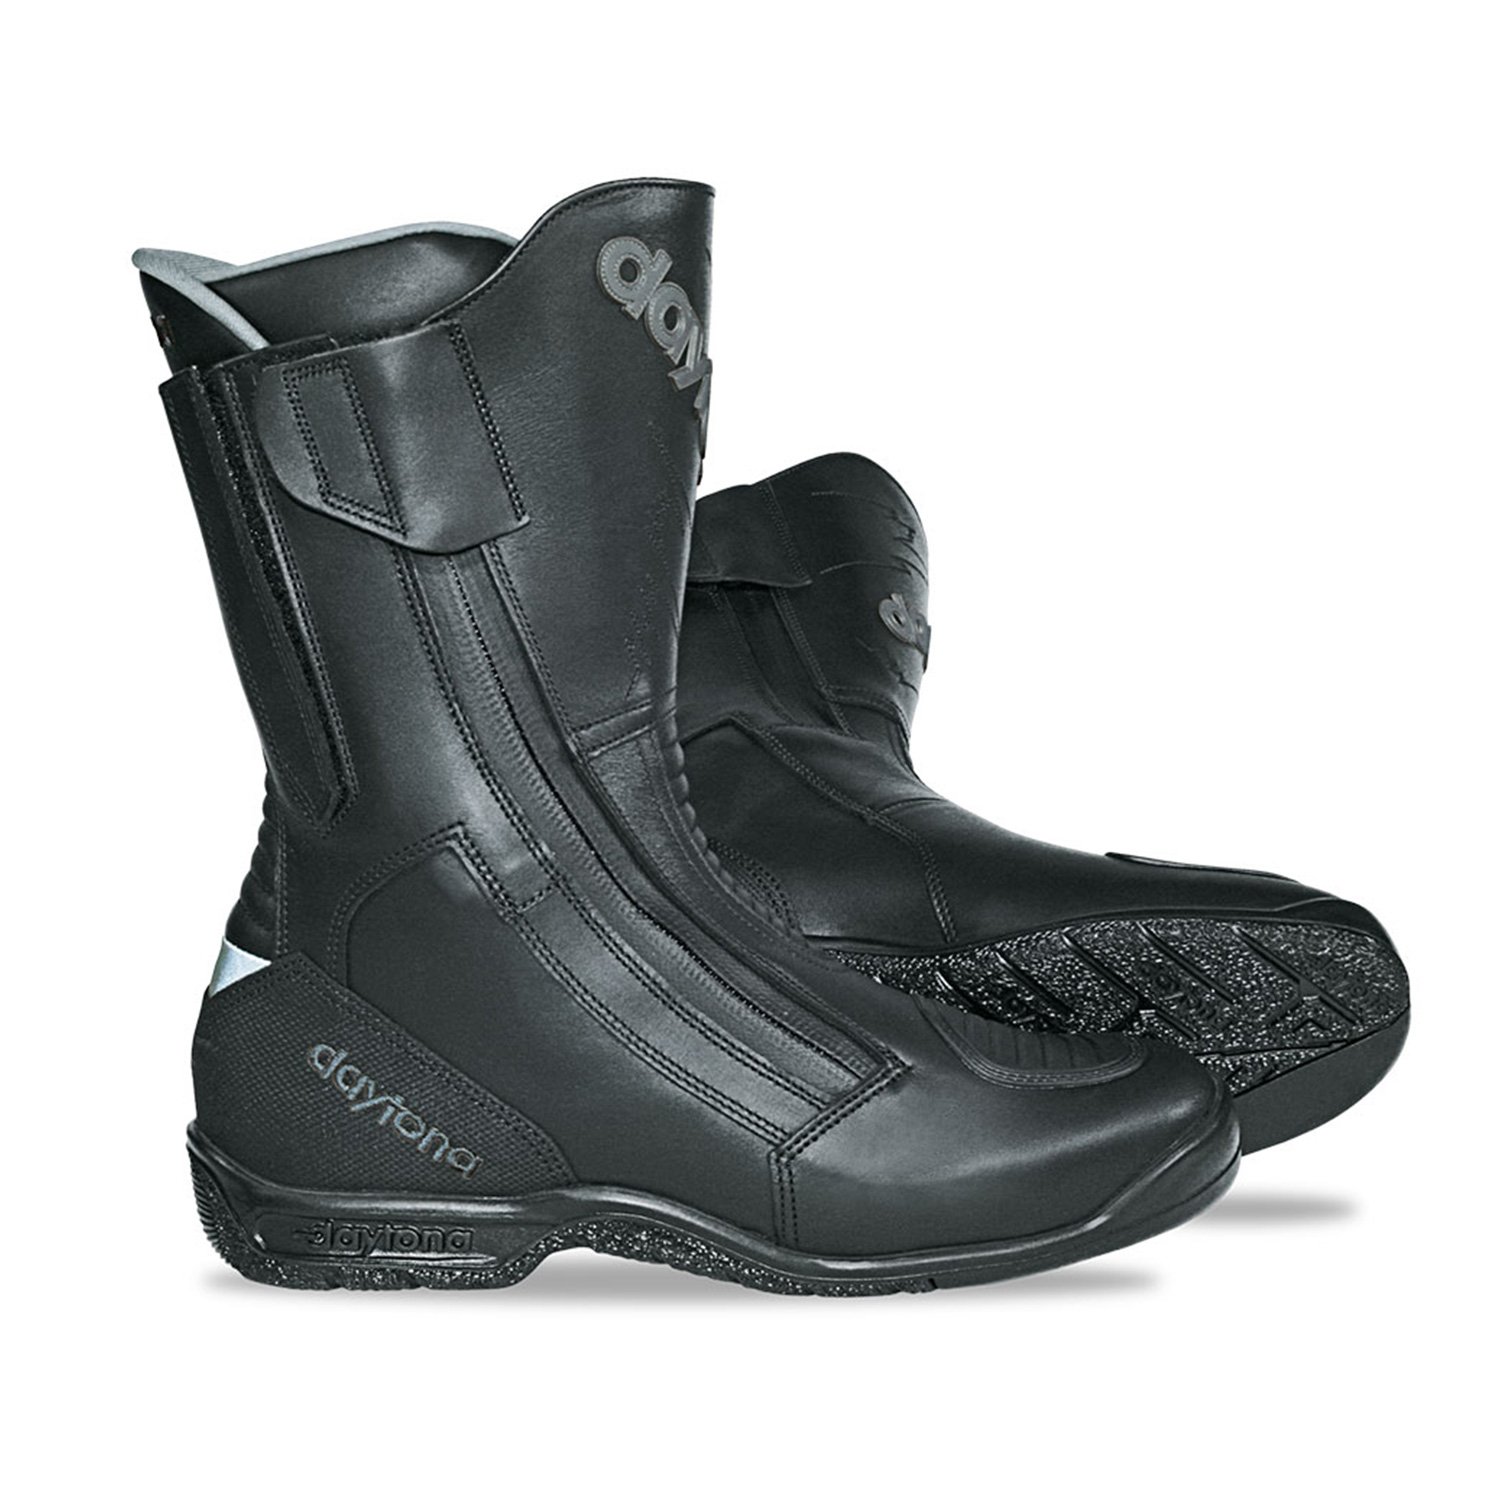 Image of Daytona Road Star X-Wide [XL] Noir Bottes Taille 41